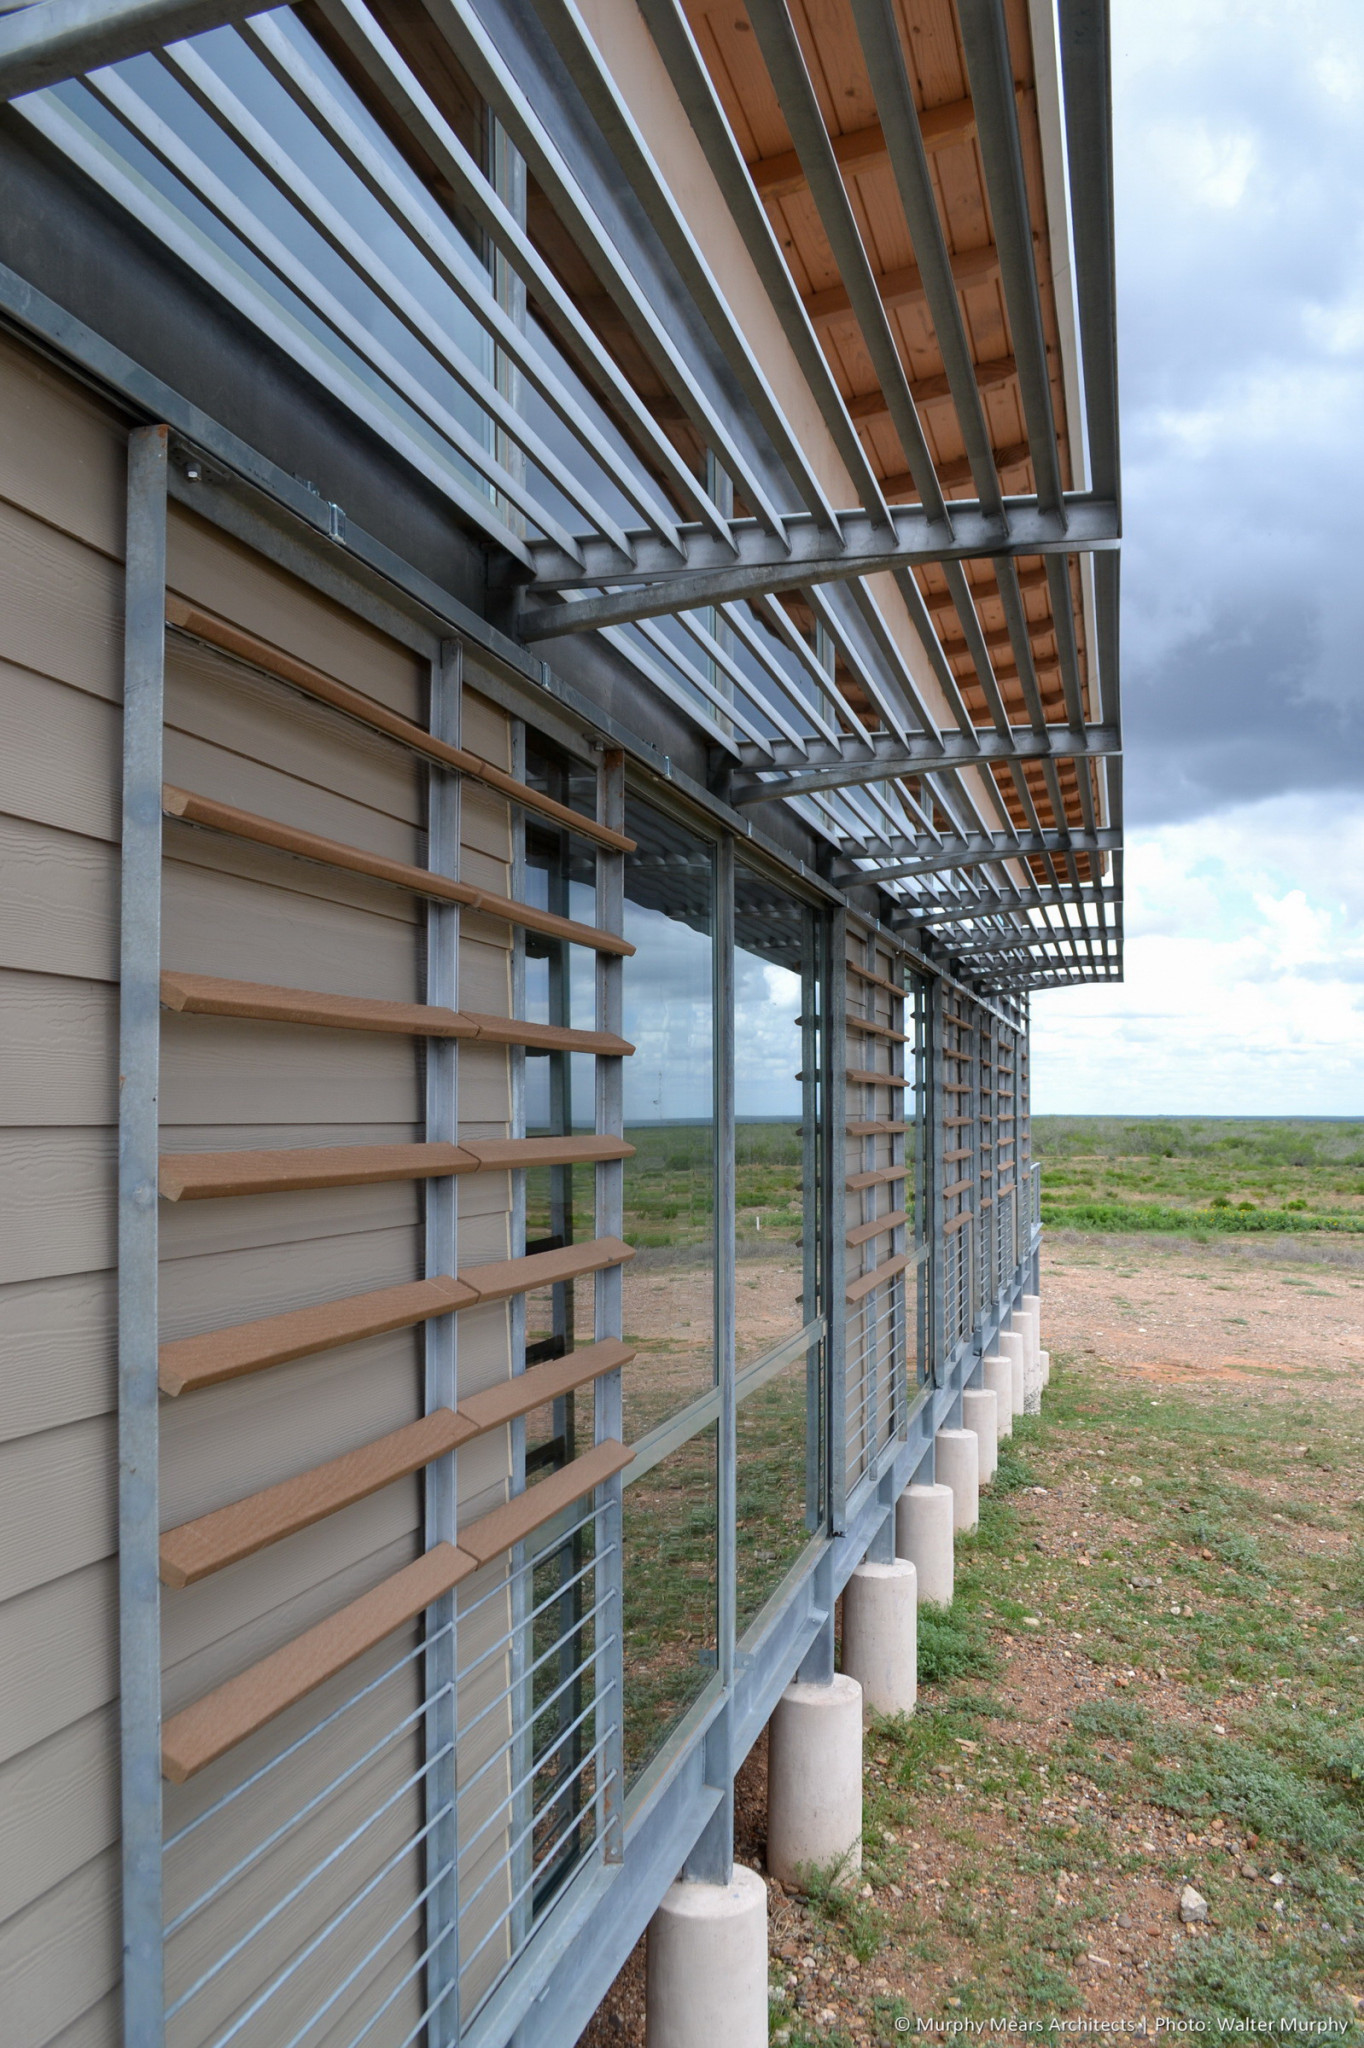 galvanized steel louver awning above rolling shutter with composite wood and steel bars